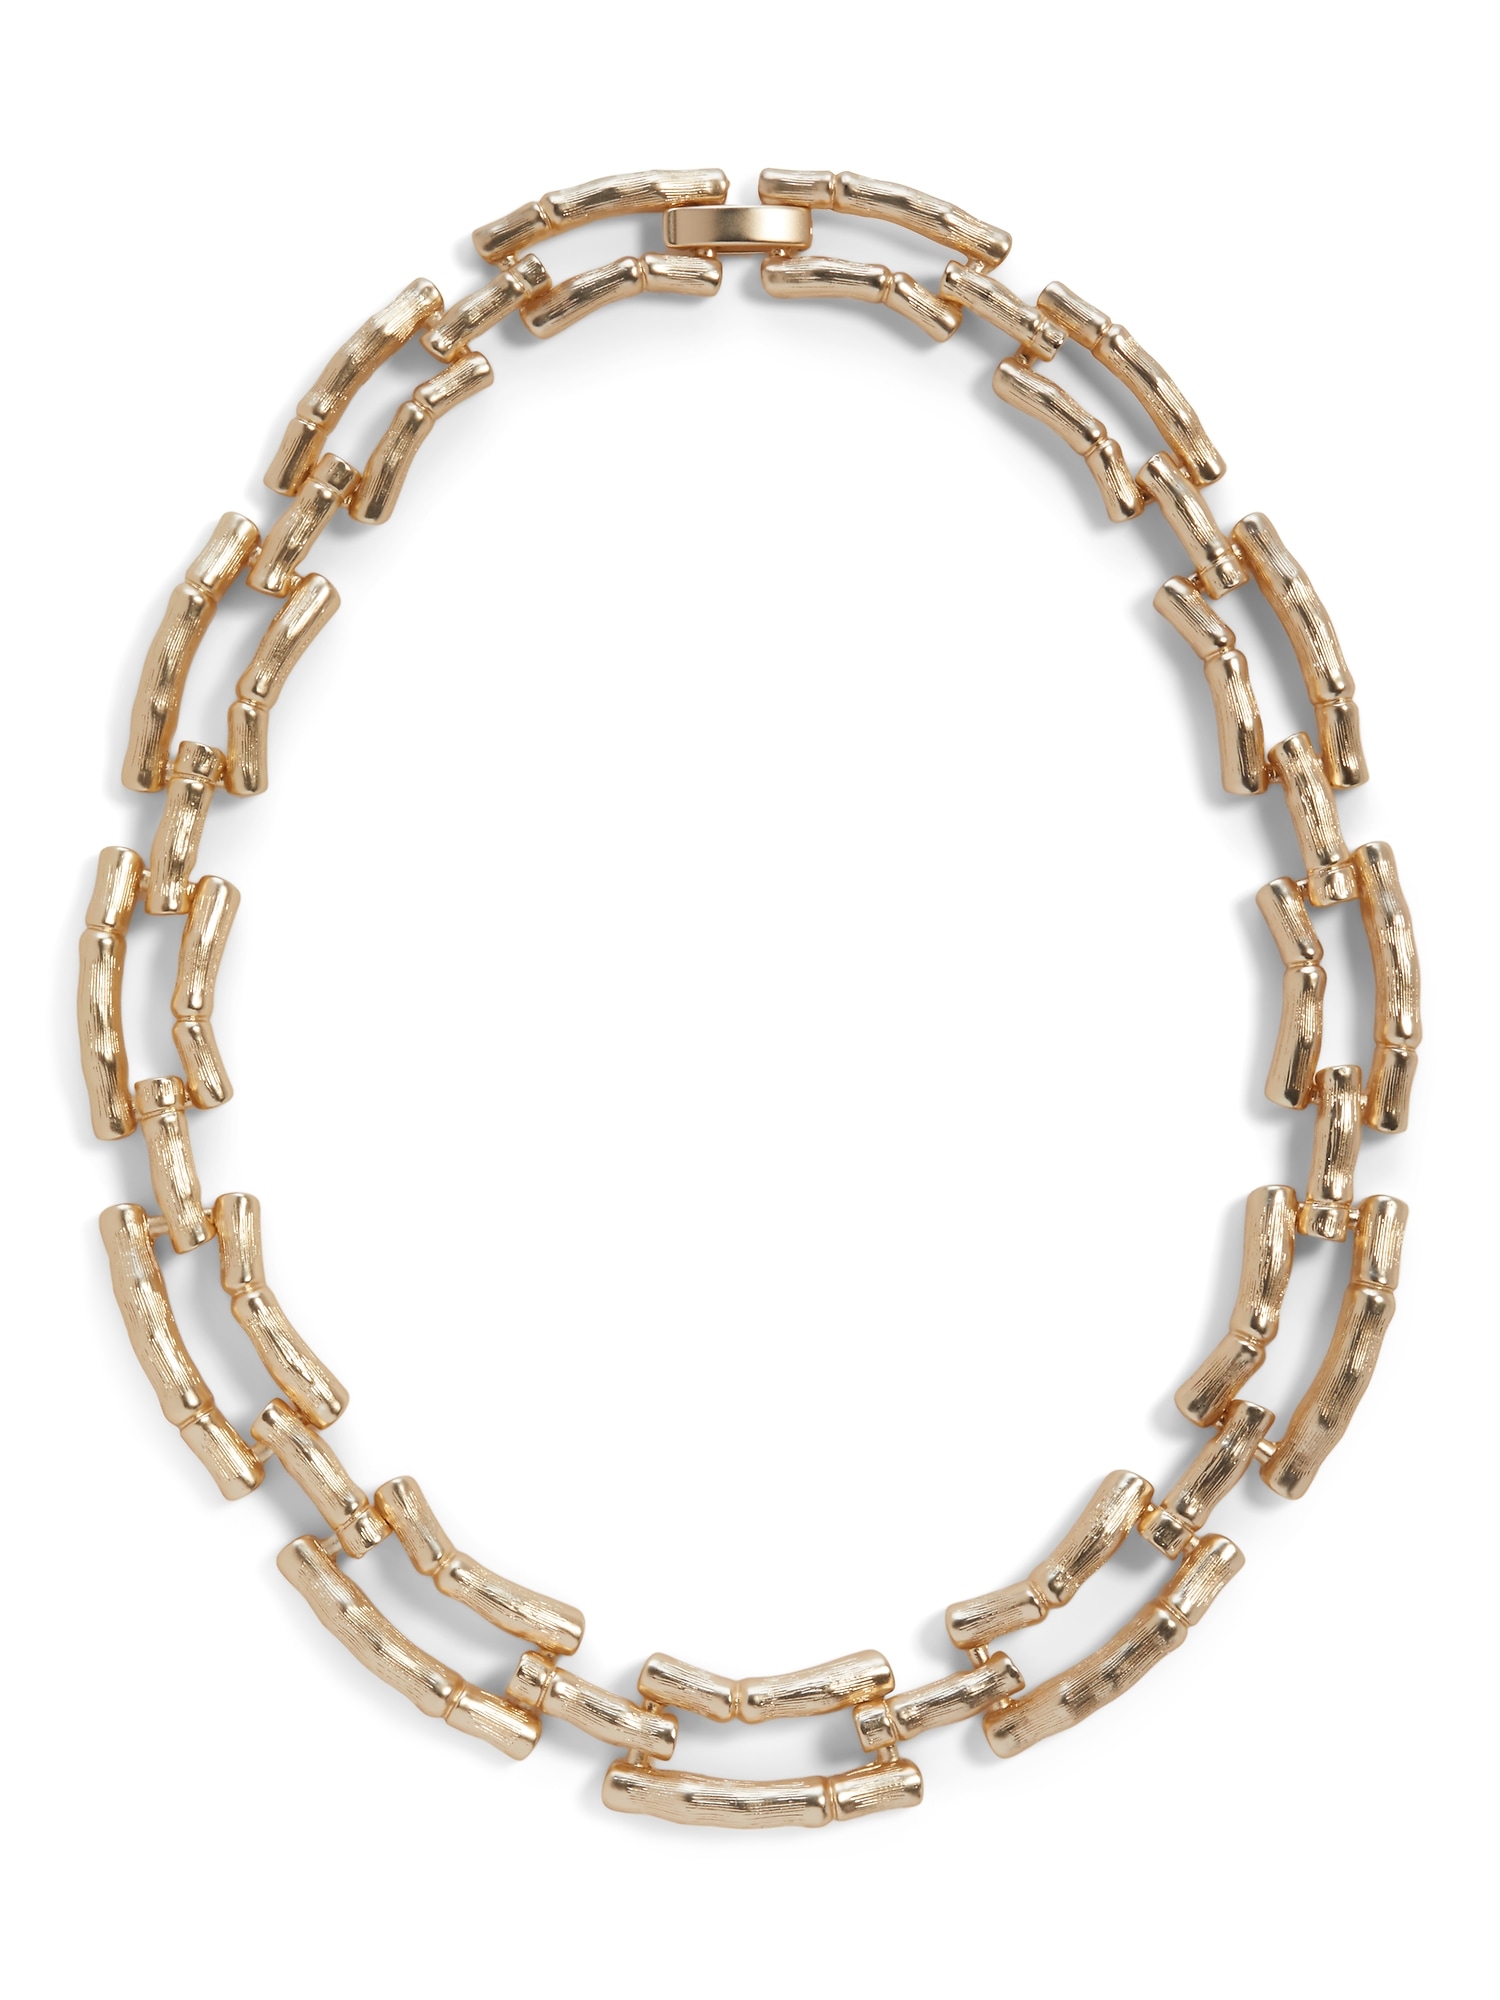 Gold Bamboo Necklace